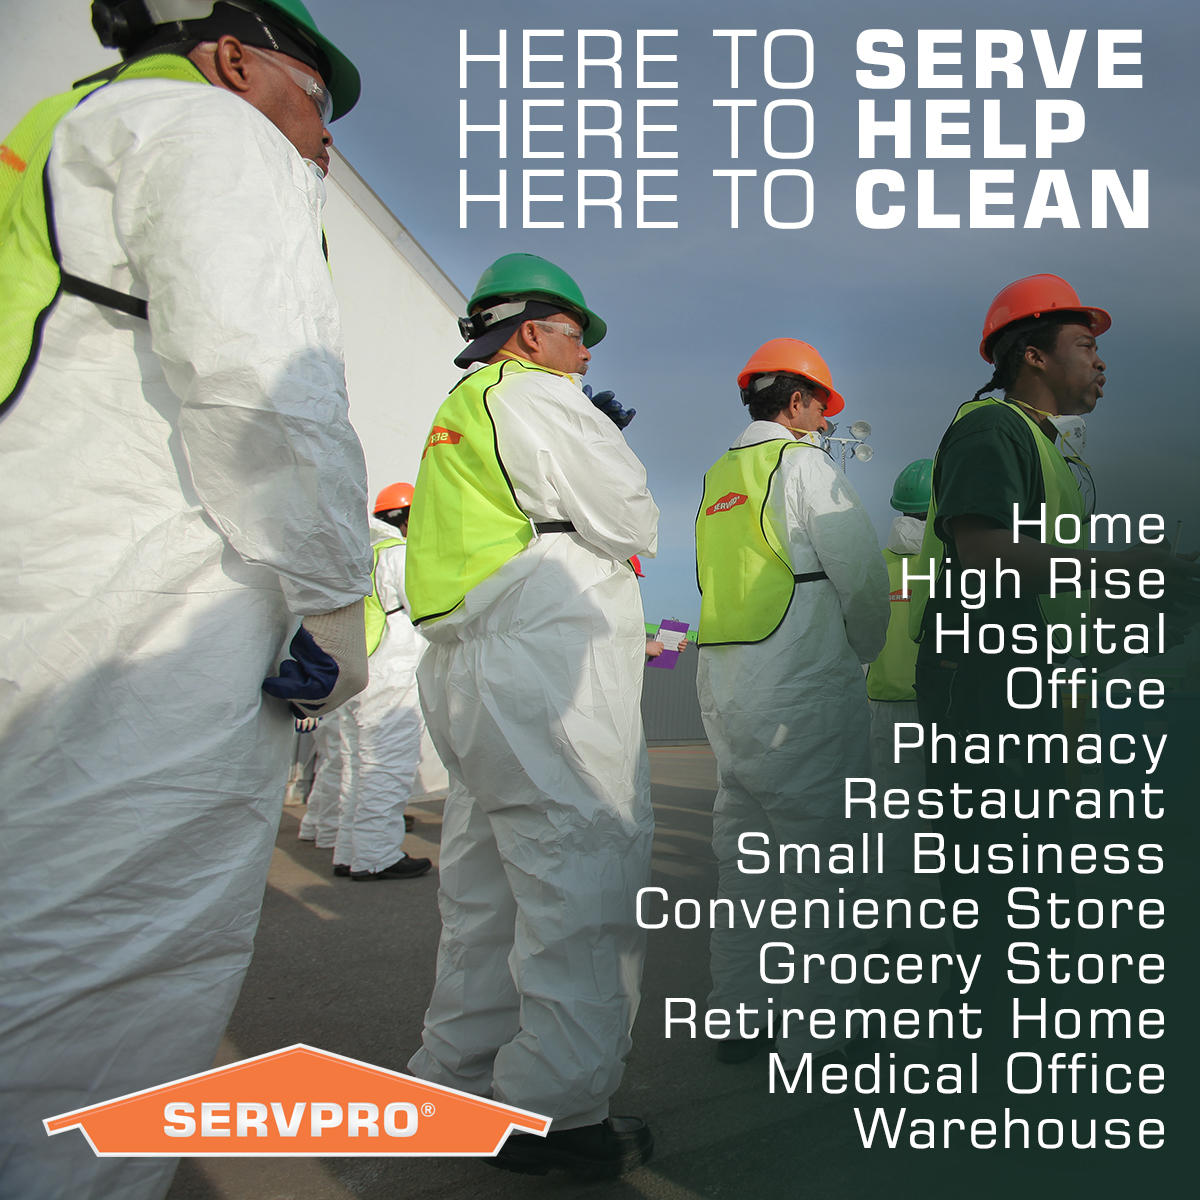 During this unprecedented time caused by the global pandemic of Coronavirus, this is a reminder that we are specialists in cleaning services. Let us help ensure your property has a cleaning strategy in place.